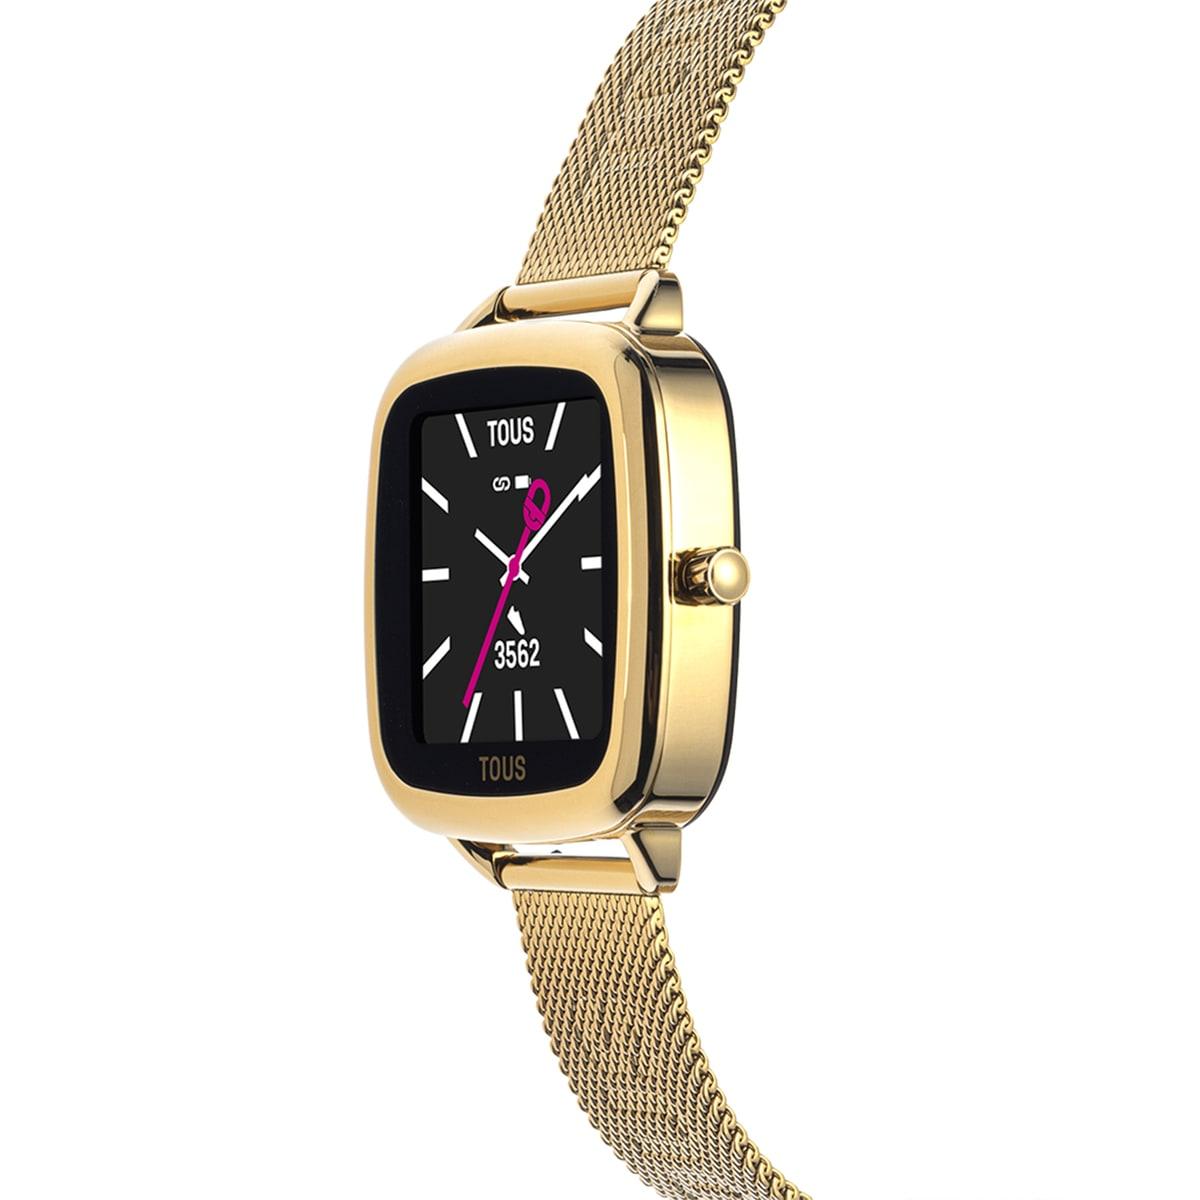 RELOJ SMARTWATCH TOUS MUJER D-CONNECT 300358083